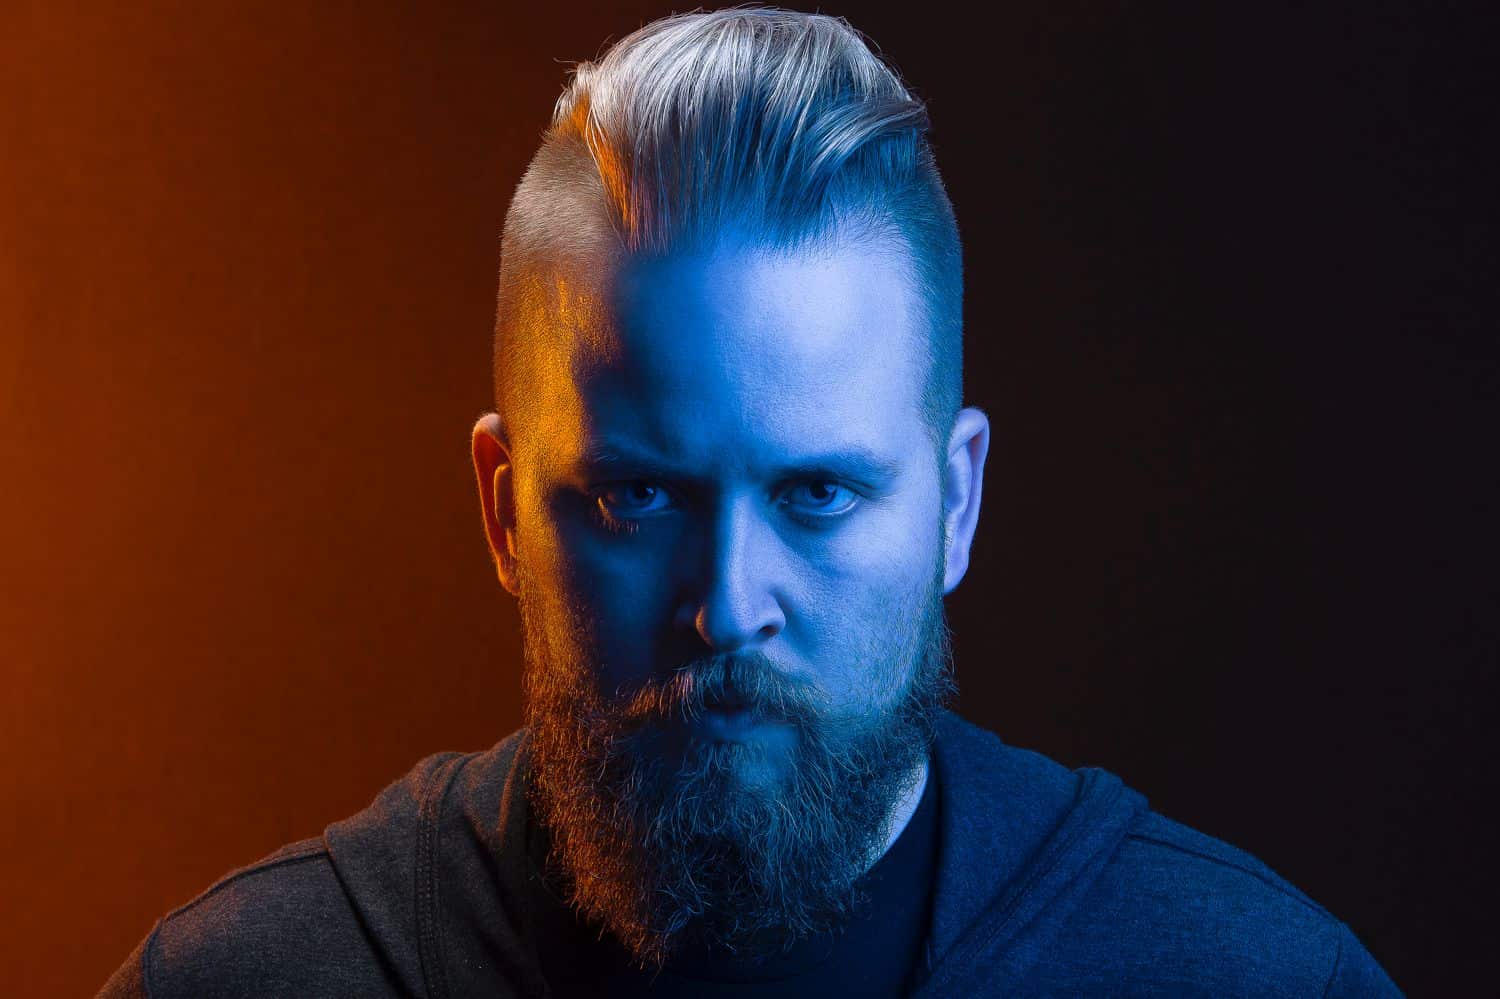 Freedom to create: photographer and digital artist Ryan Sims in blue and red lights.